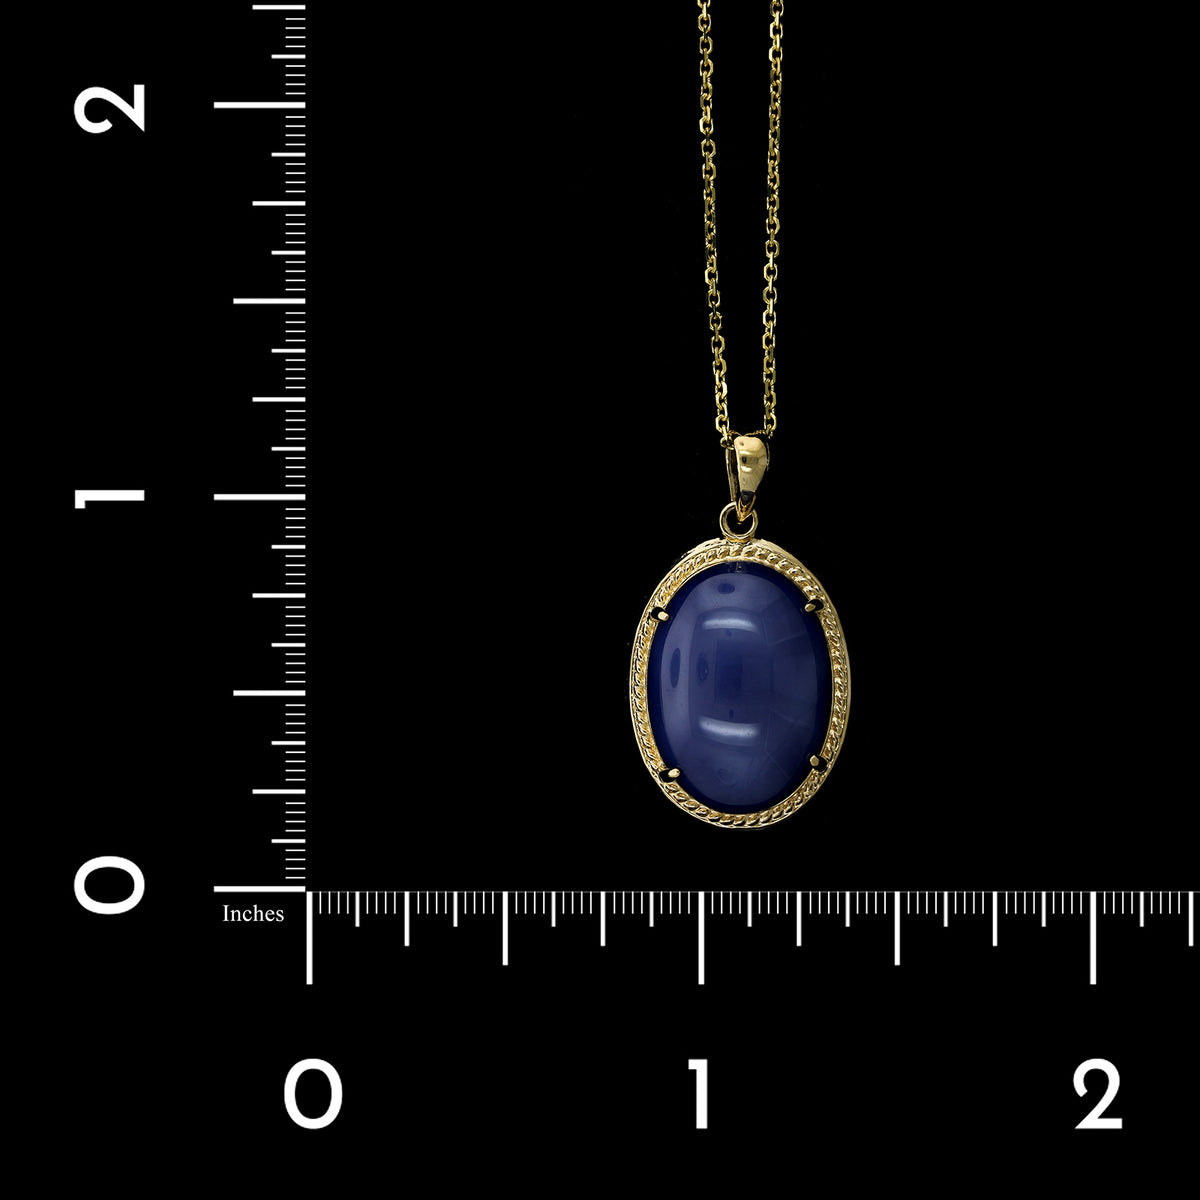 18K Yellow Gold Estate Synthetic Star Sapphire Pendant